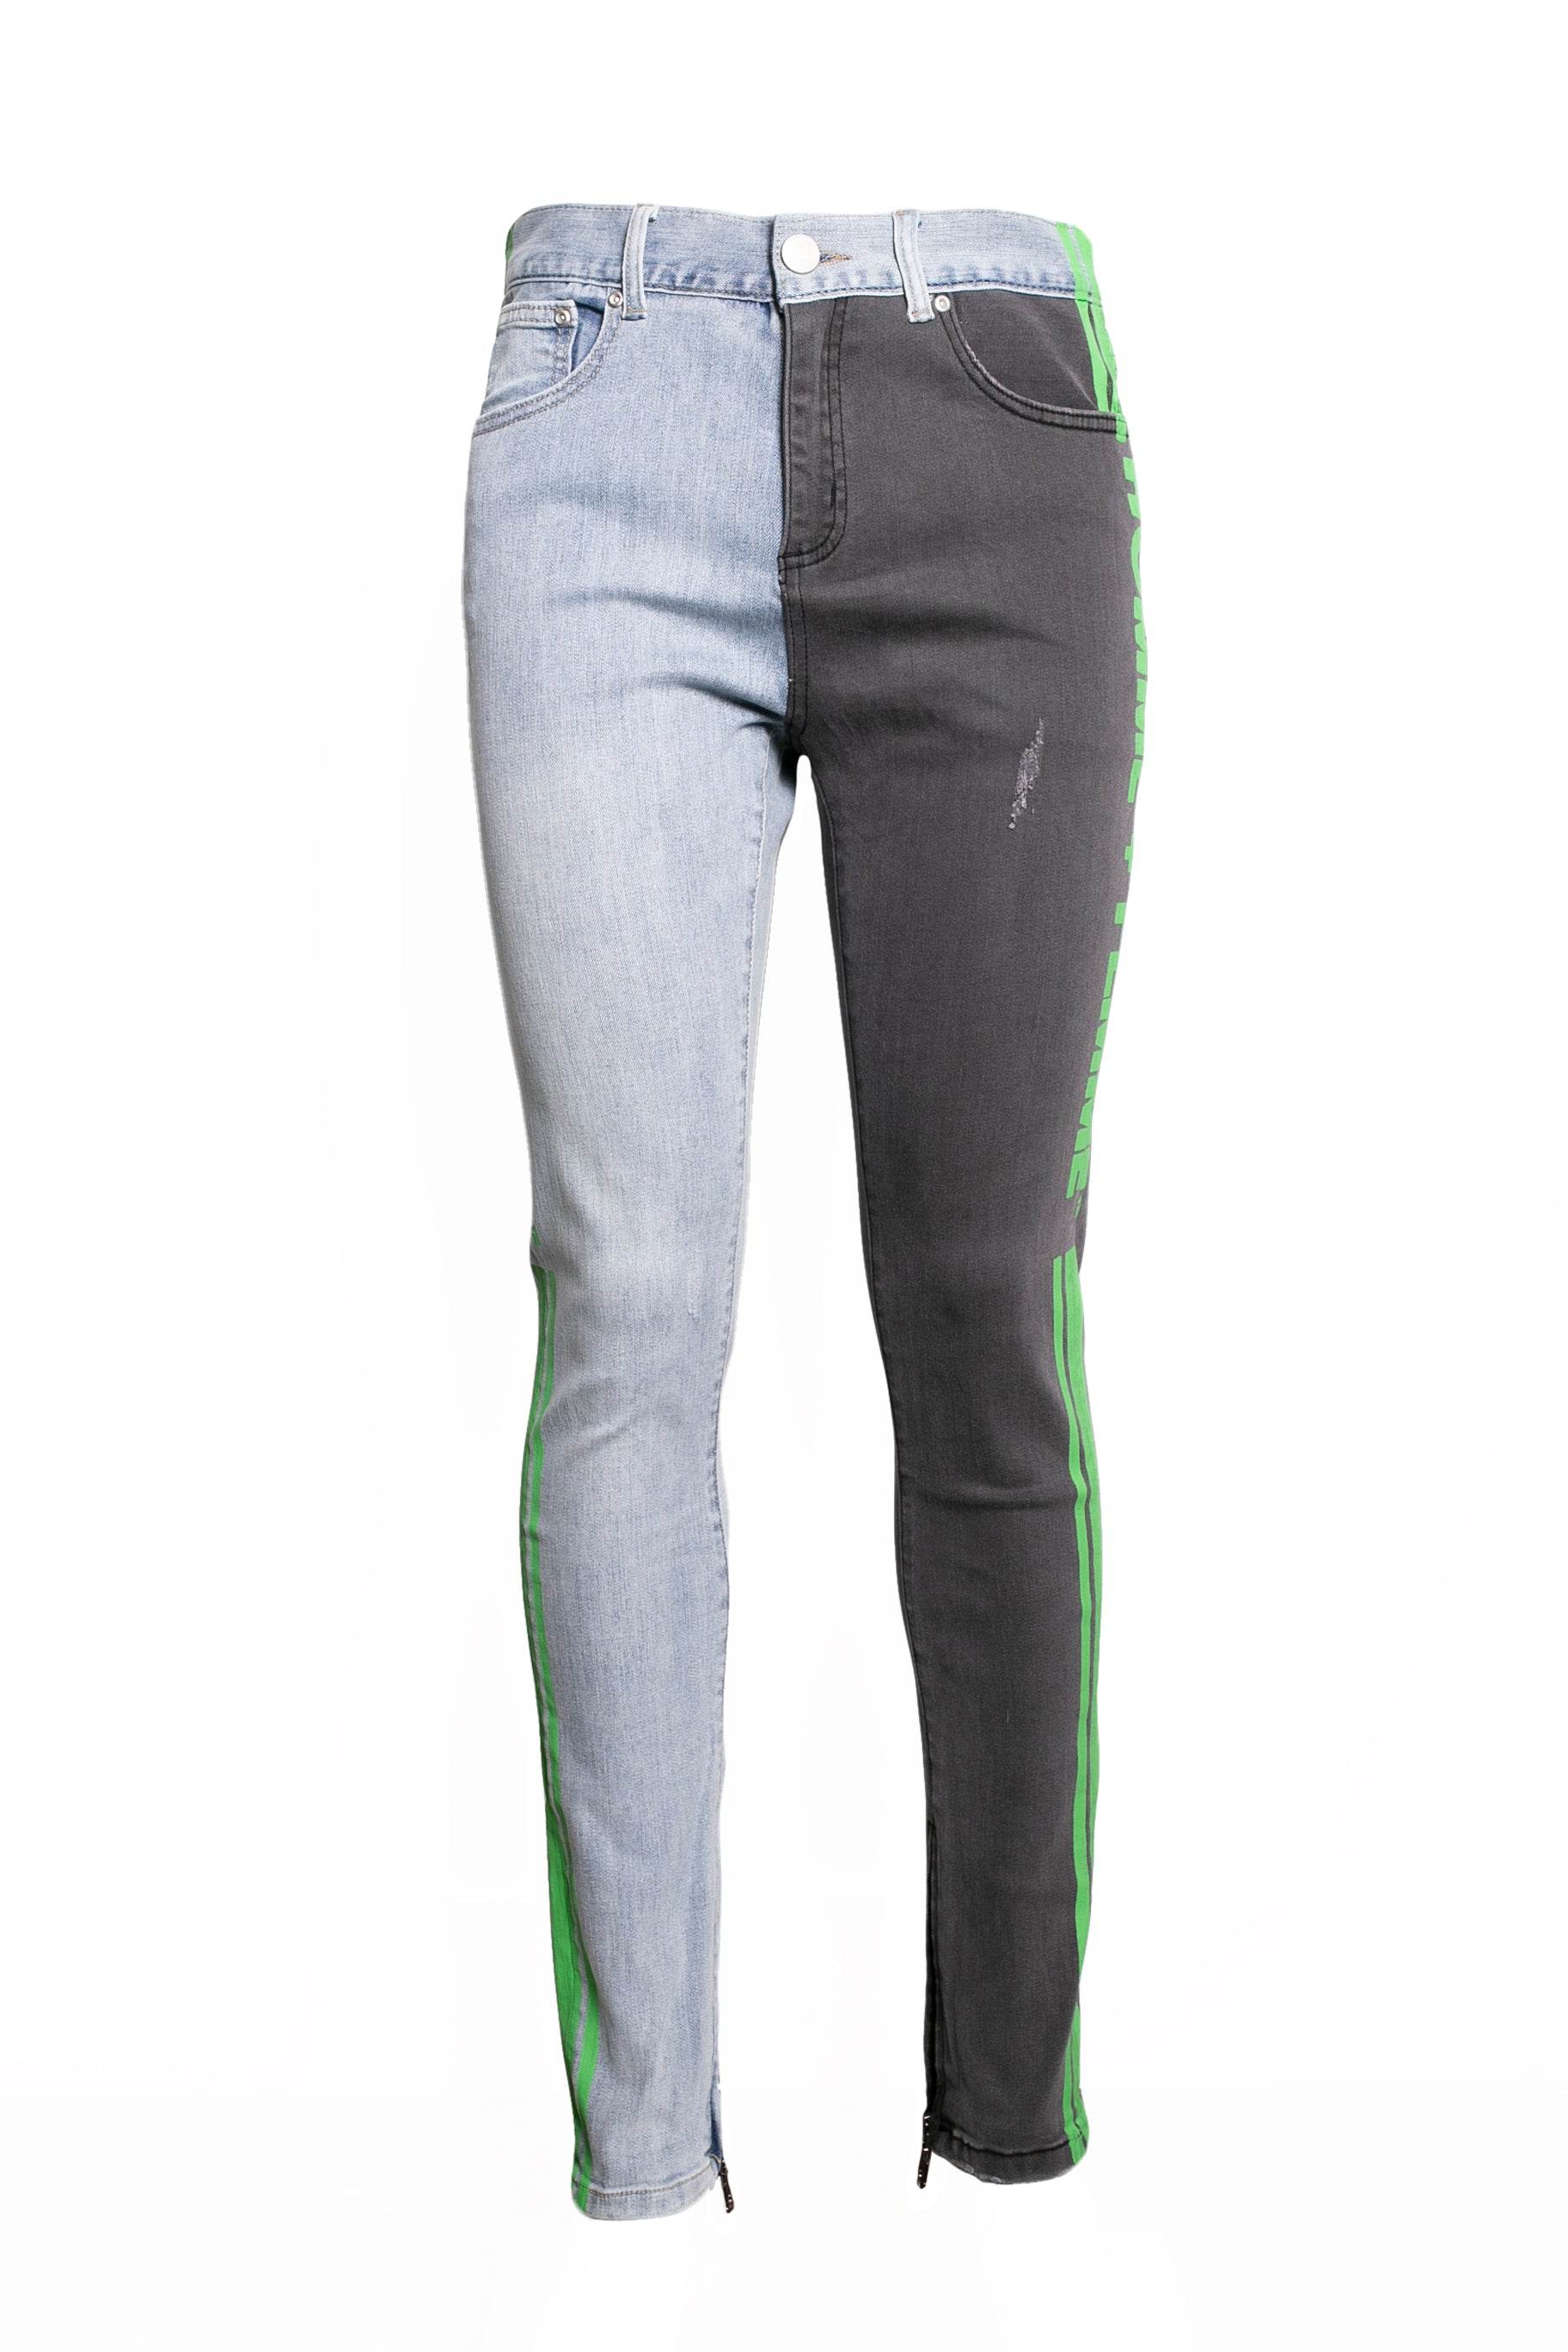 lime green jeans mens